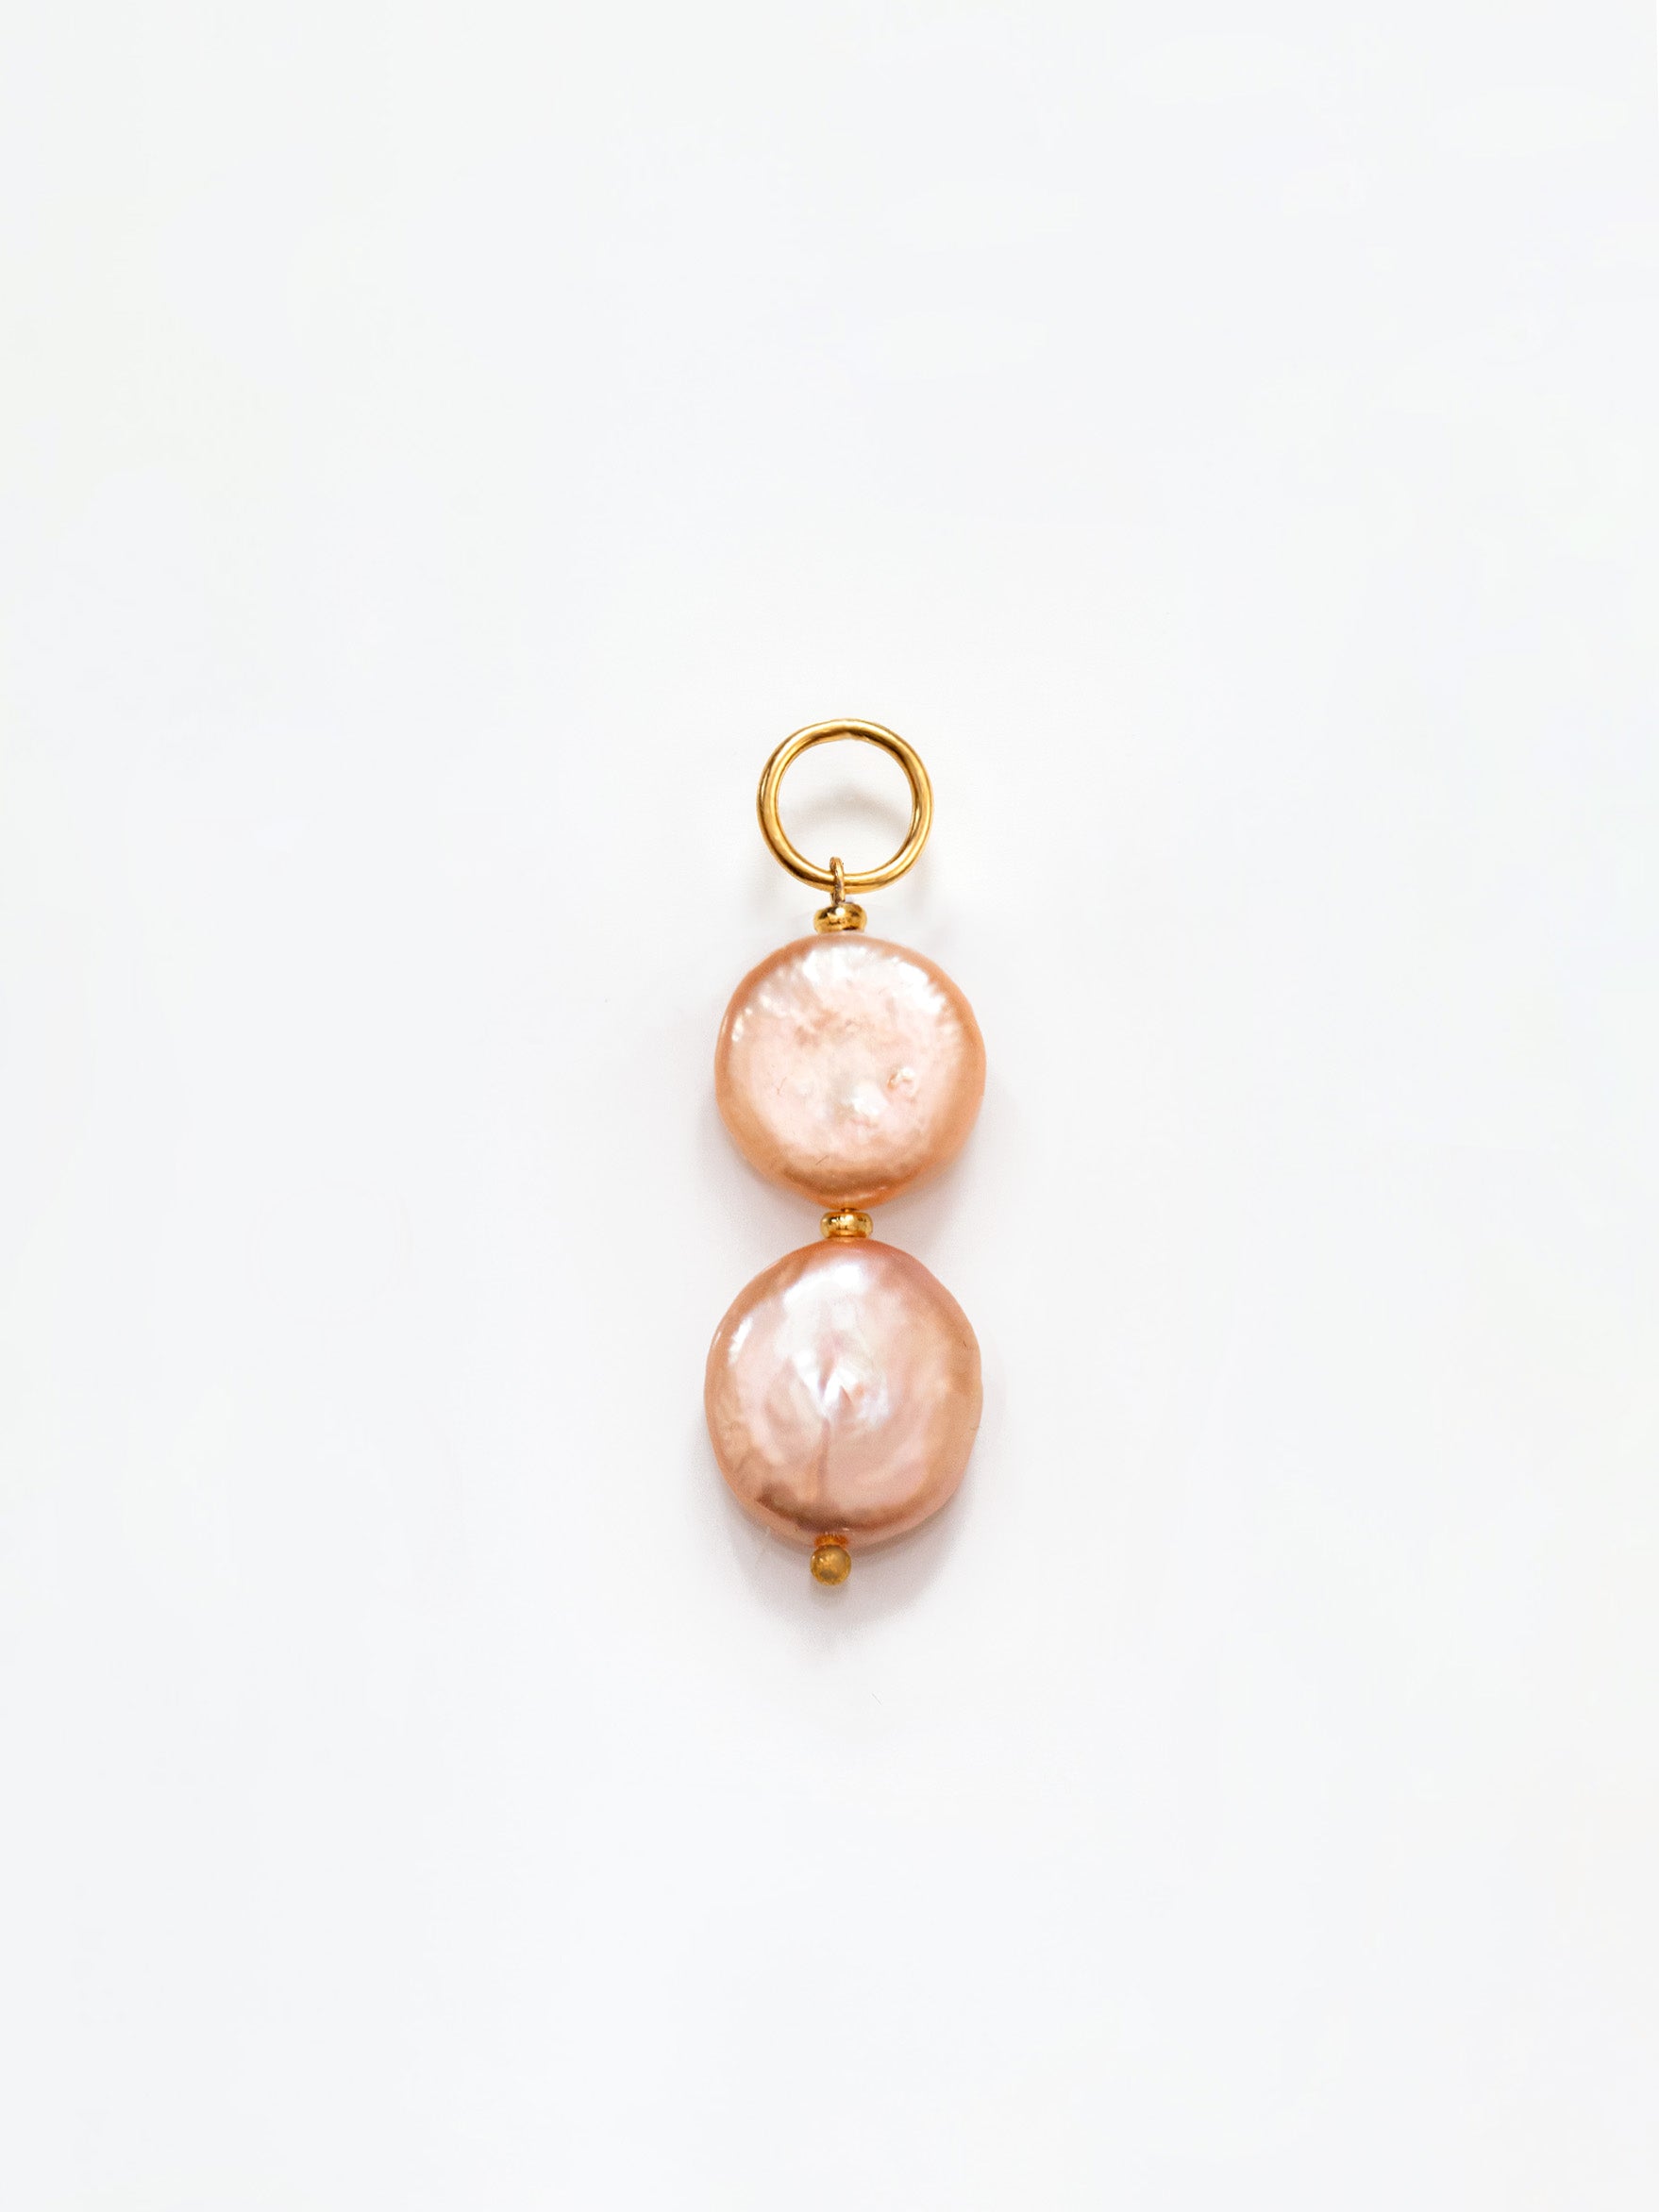 Gold Pendant / Charm With Two Baroque Button Pearls (Pink)